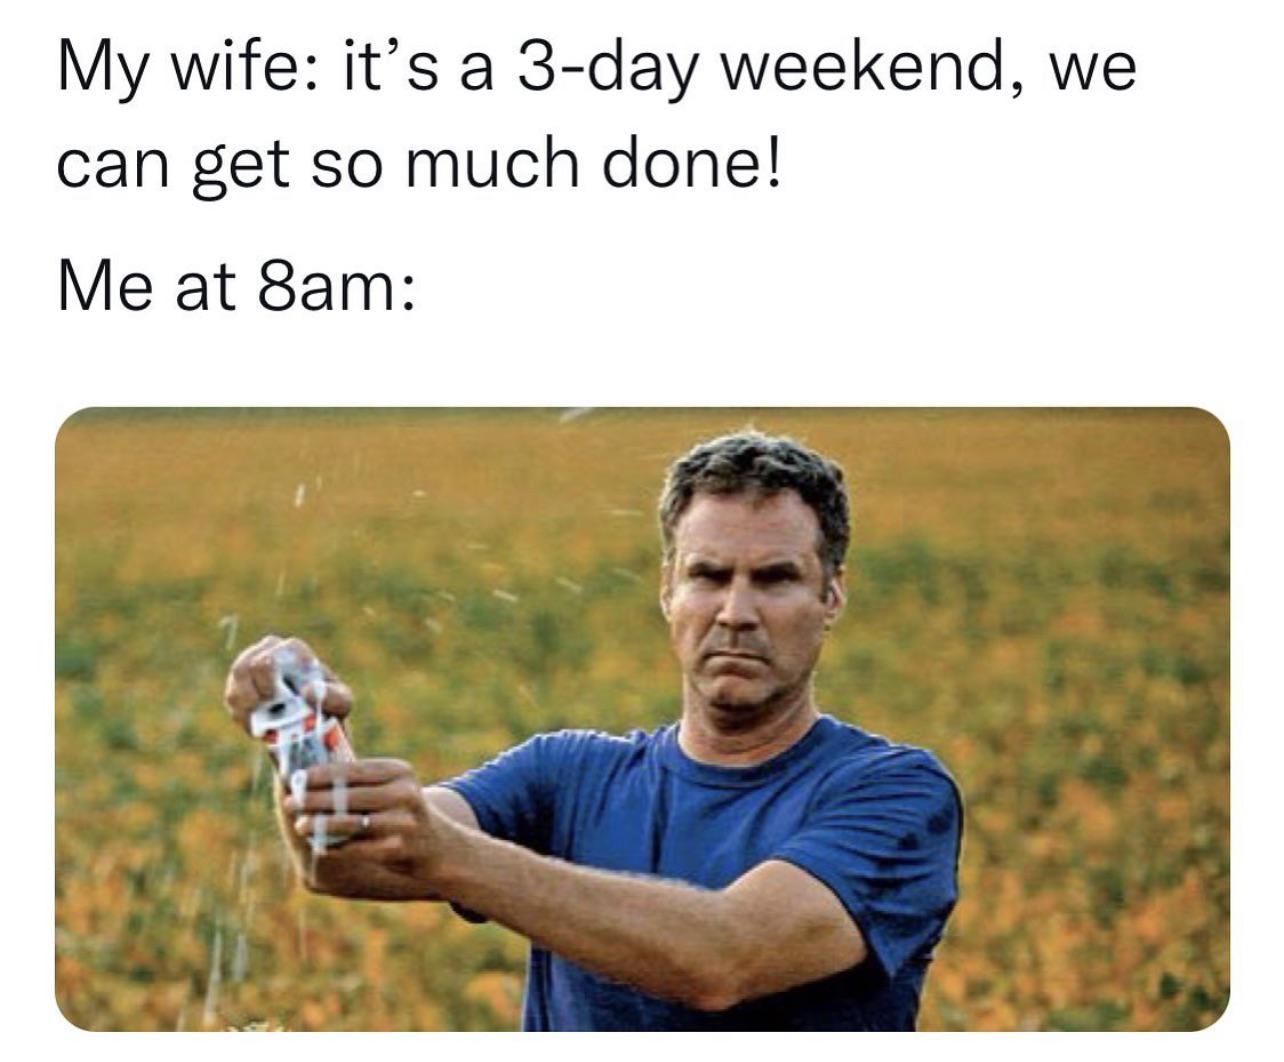 funny memes - dank memes - will ferrell beer meme - My wife it's a 3day weekend, we can get so much done! Me at 8am